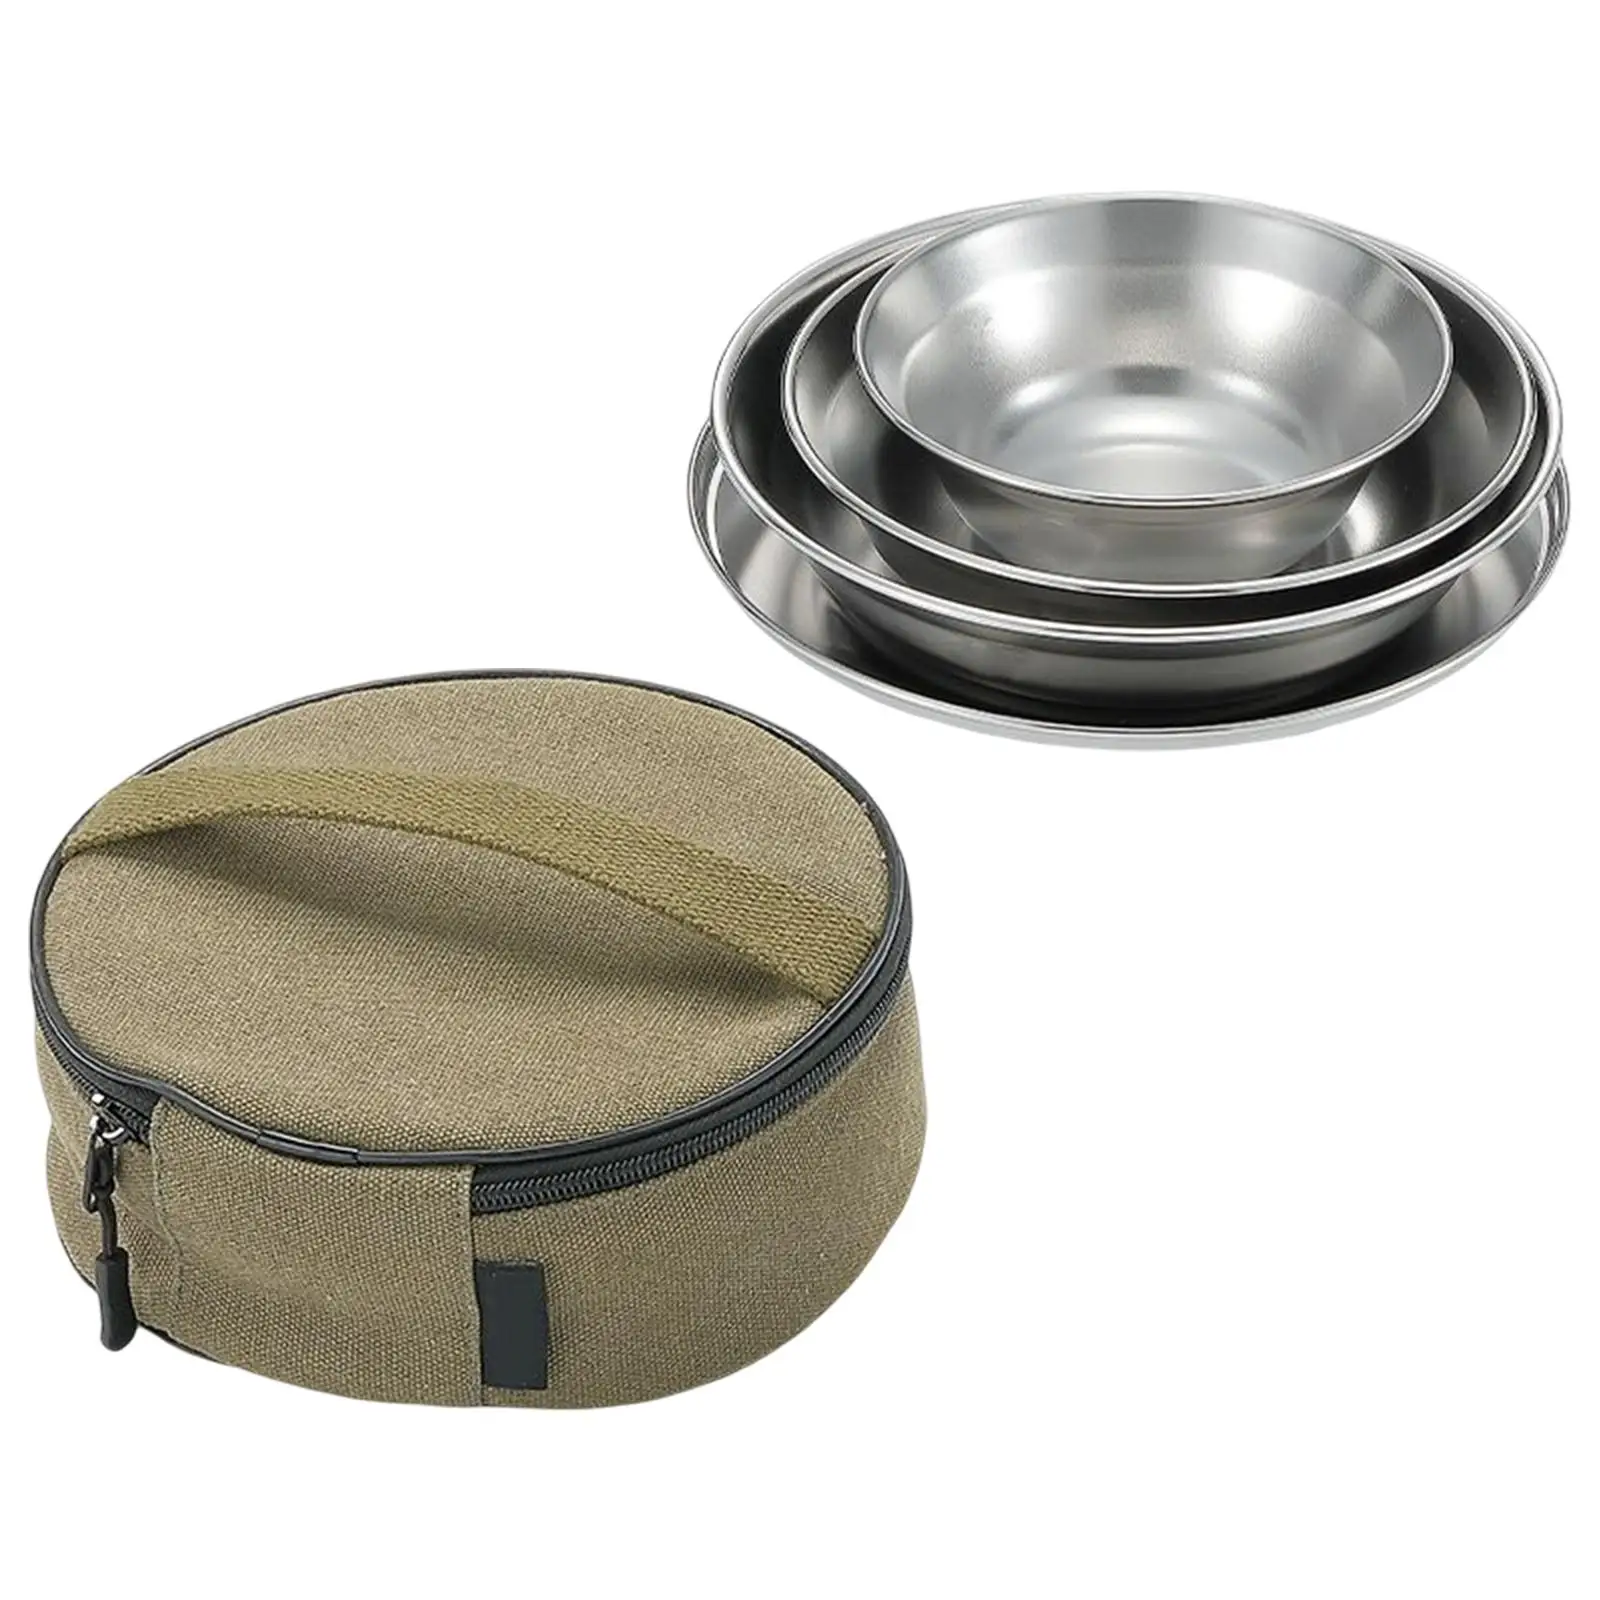 Portable Camping Tableware with Storage Bag Dinner Dish Fruit Tray Kitchen Utensils Travel Mess Kit for Barbecue Backpacking